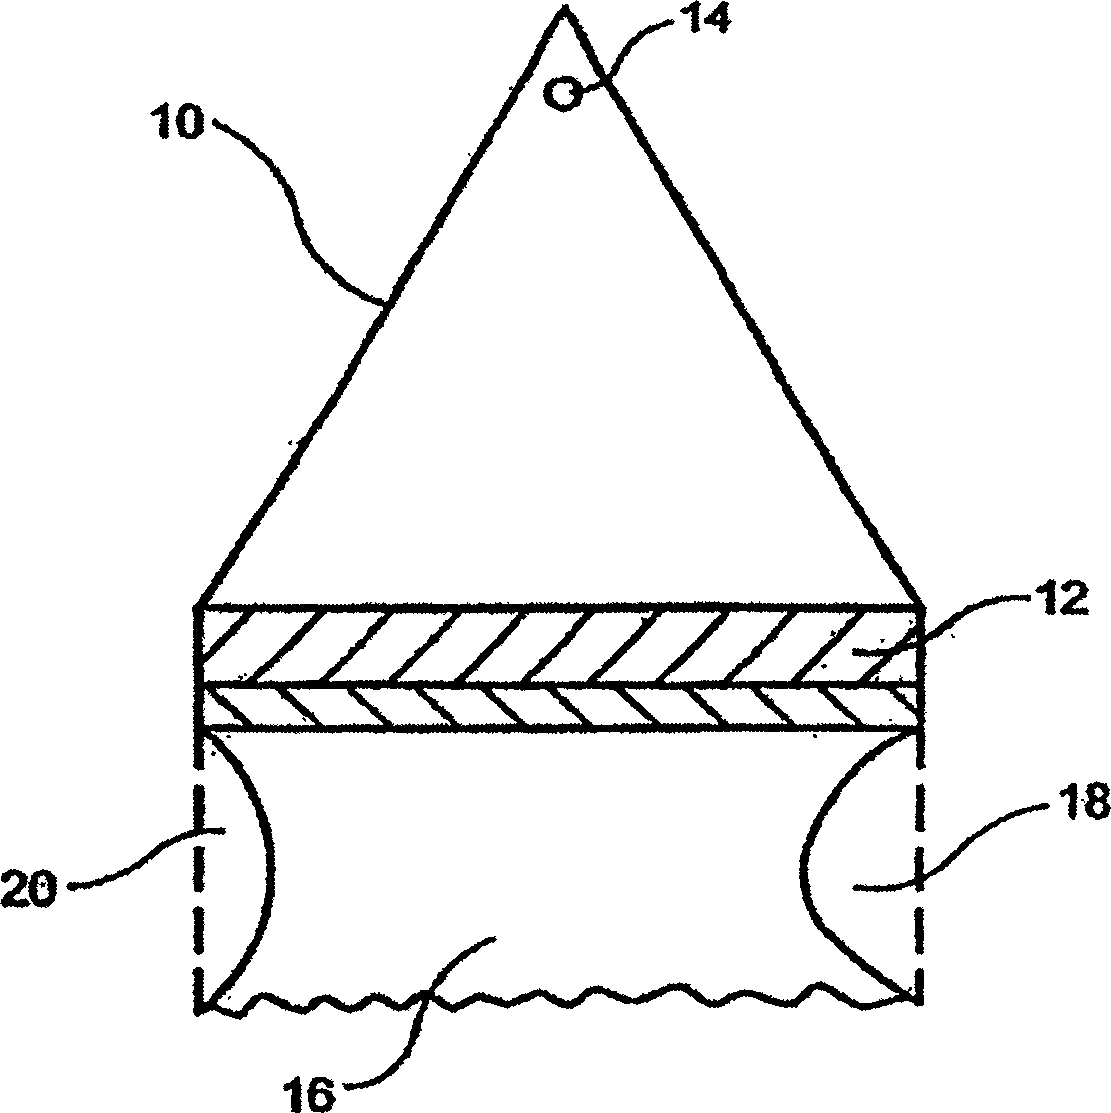 Multi-tier rope harness for installing a fabric into a papermaking machine